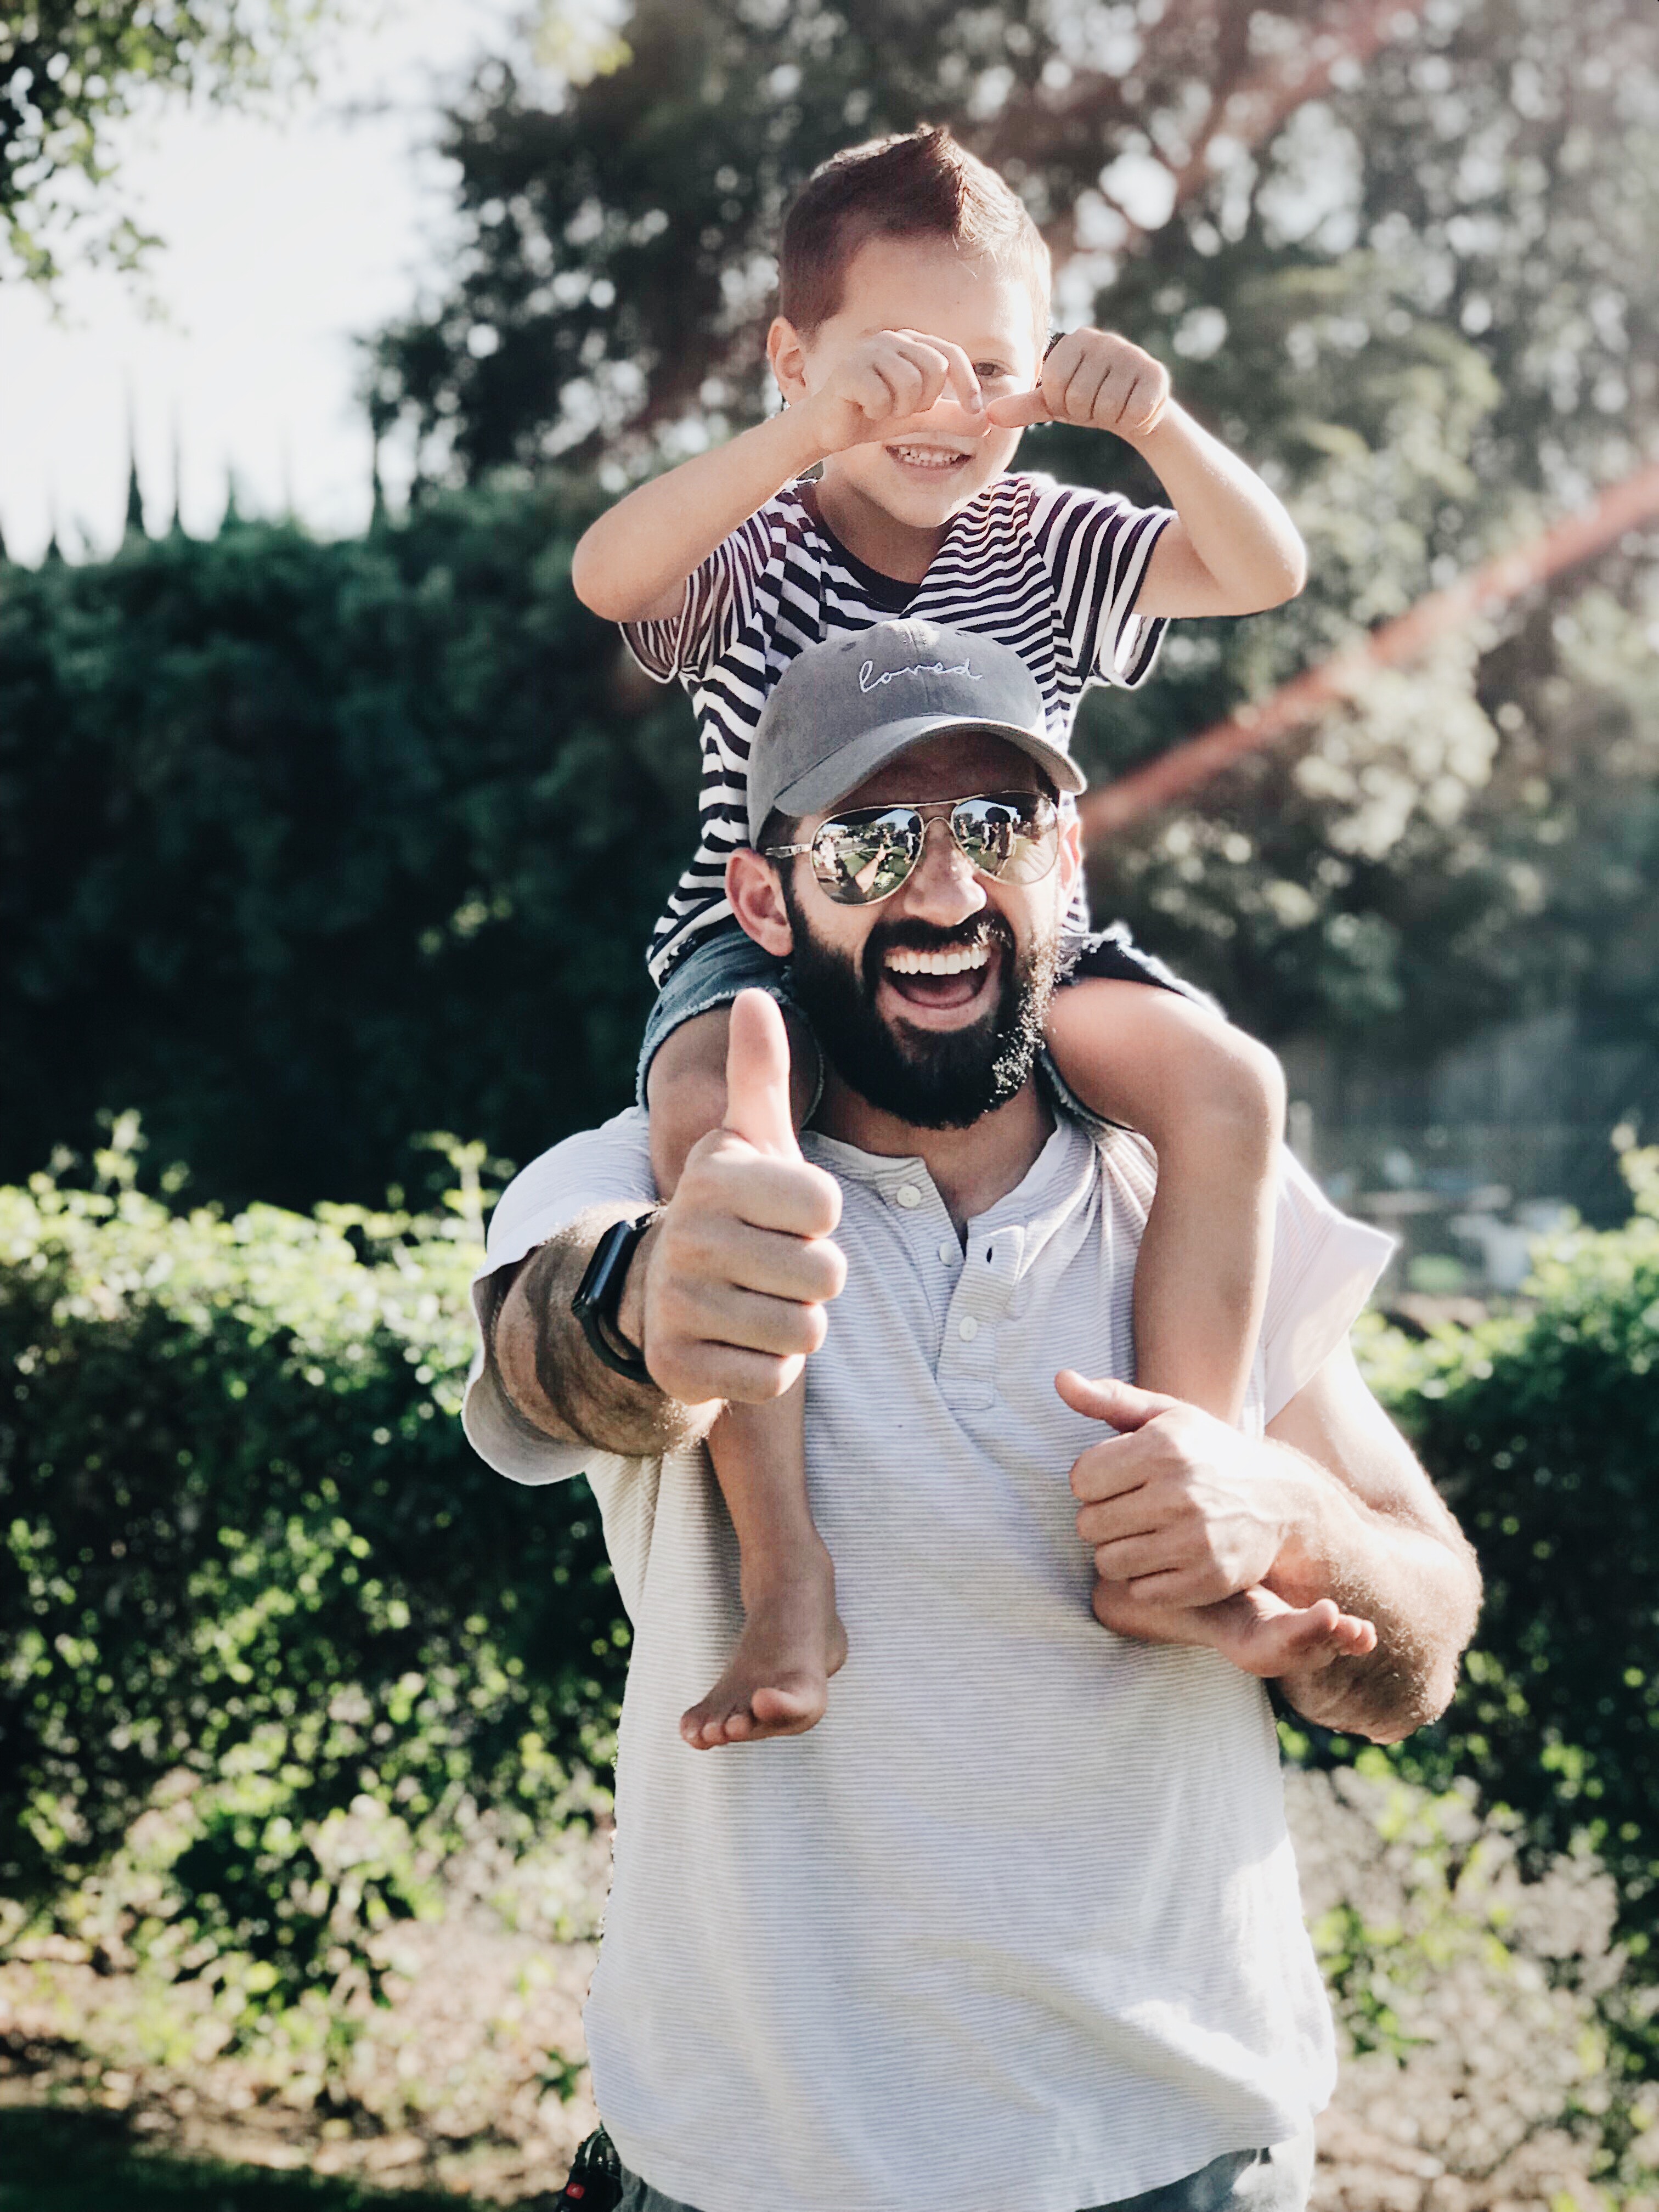 Photo from Pexels https://www.pexels.com/photo/man-carrying-his-son-over-the-shoulders-1456951/
  dad-kid-fun-play